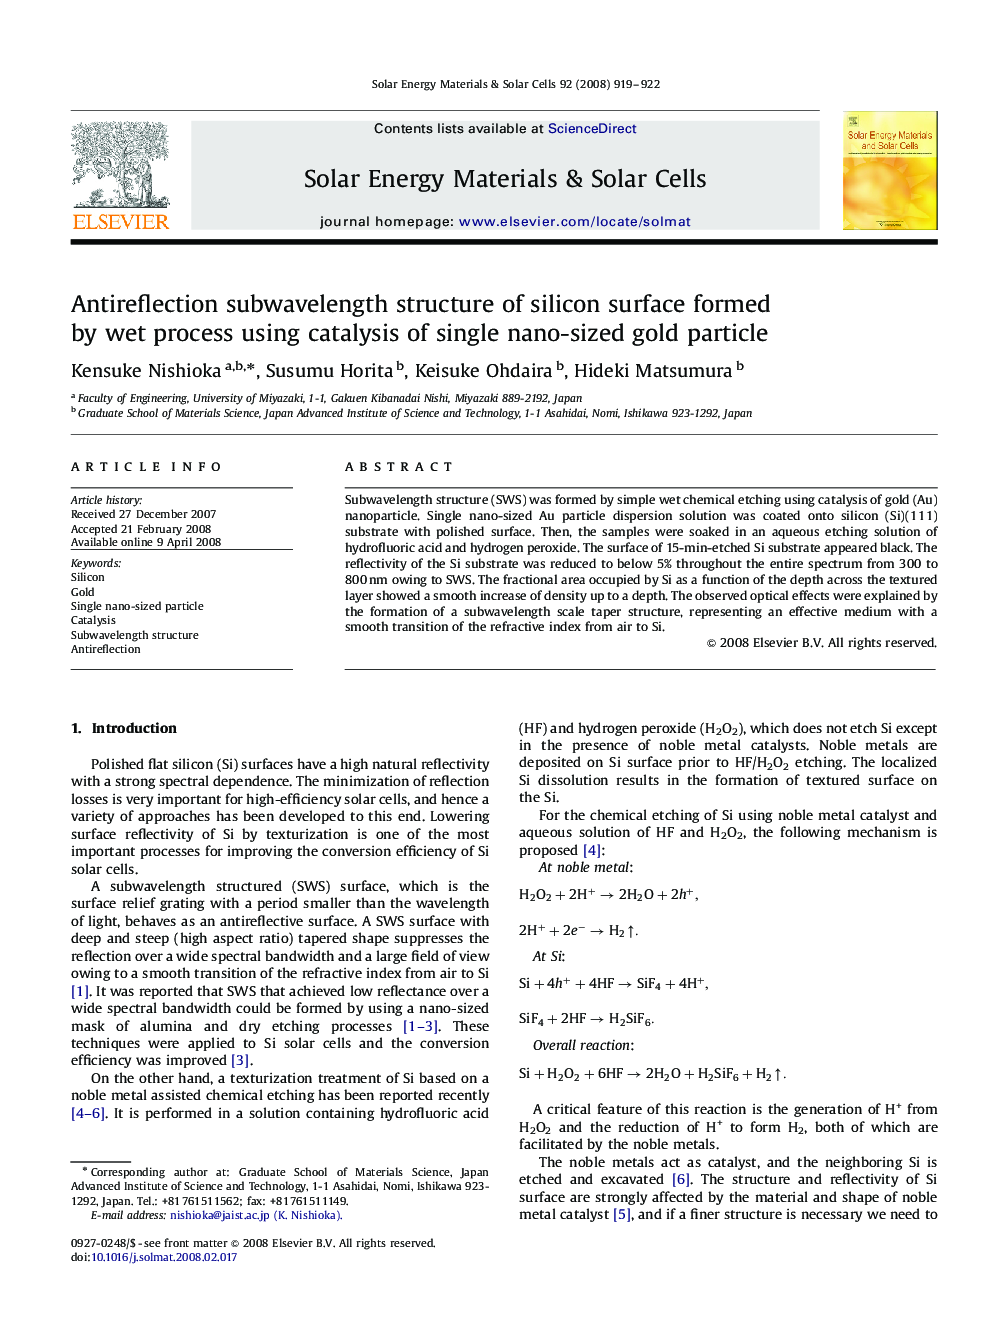 Antireflection subwavelength structure of silicon surface formed by wet process using catalysis of single nano-sized gold particle